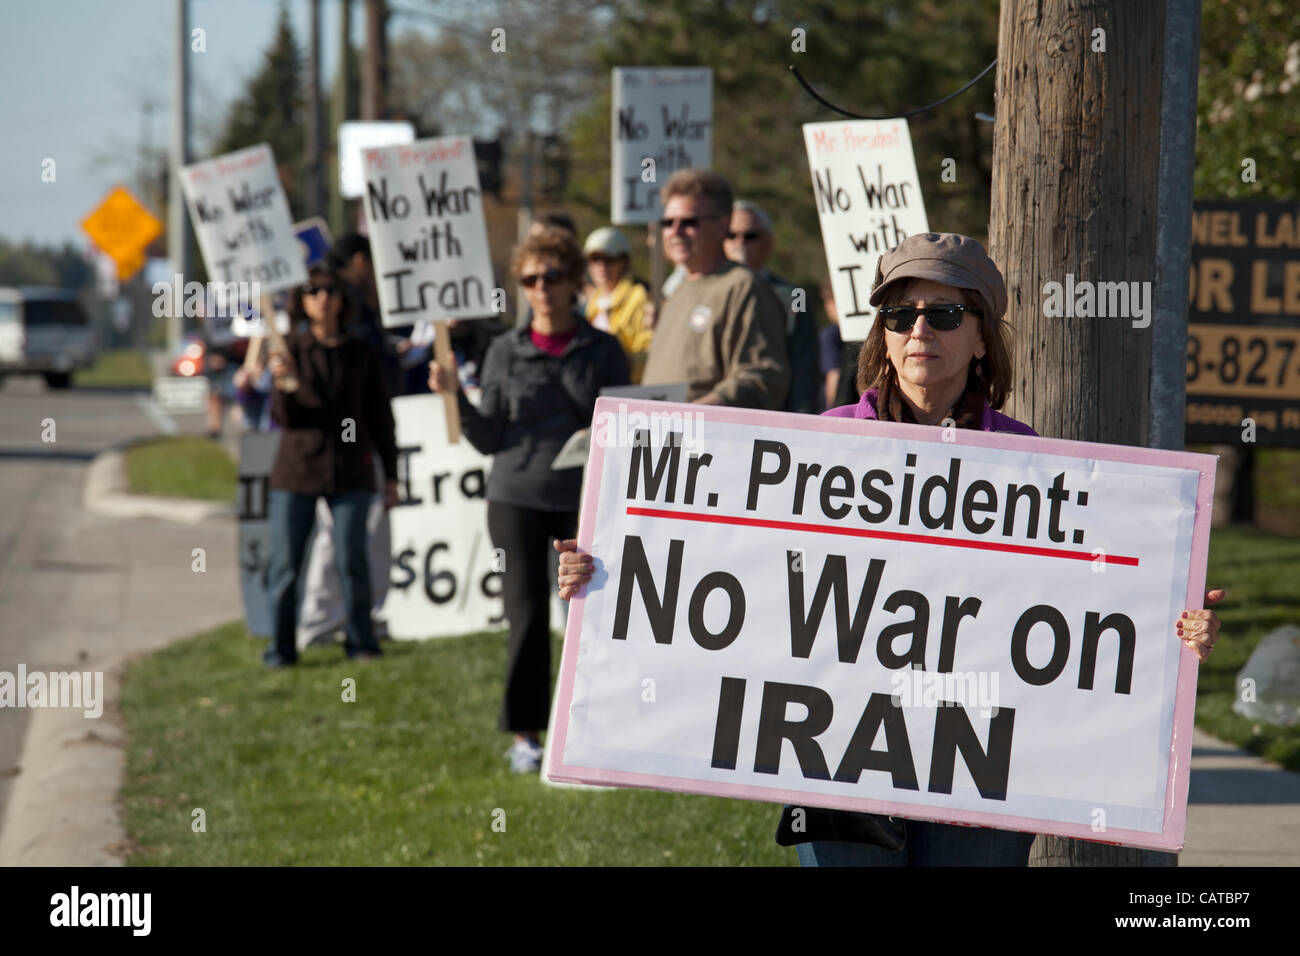 Bingham Farms, Michigan - Peace activists hold signs opposing war with Iran while waiting for President Obama's motorcade to pass. The president was attending a campaign fundraiser nearby. Stock Photo